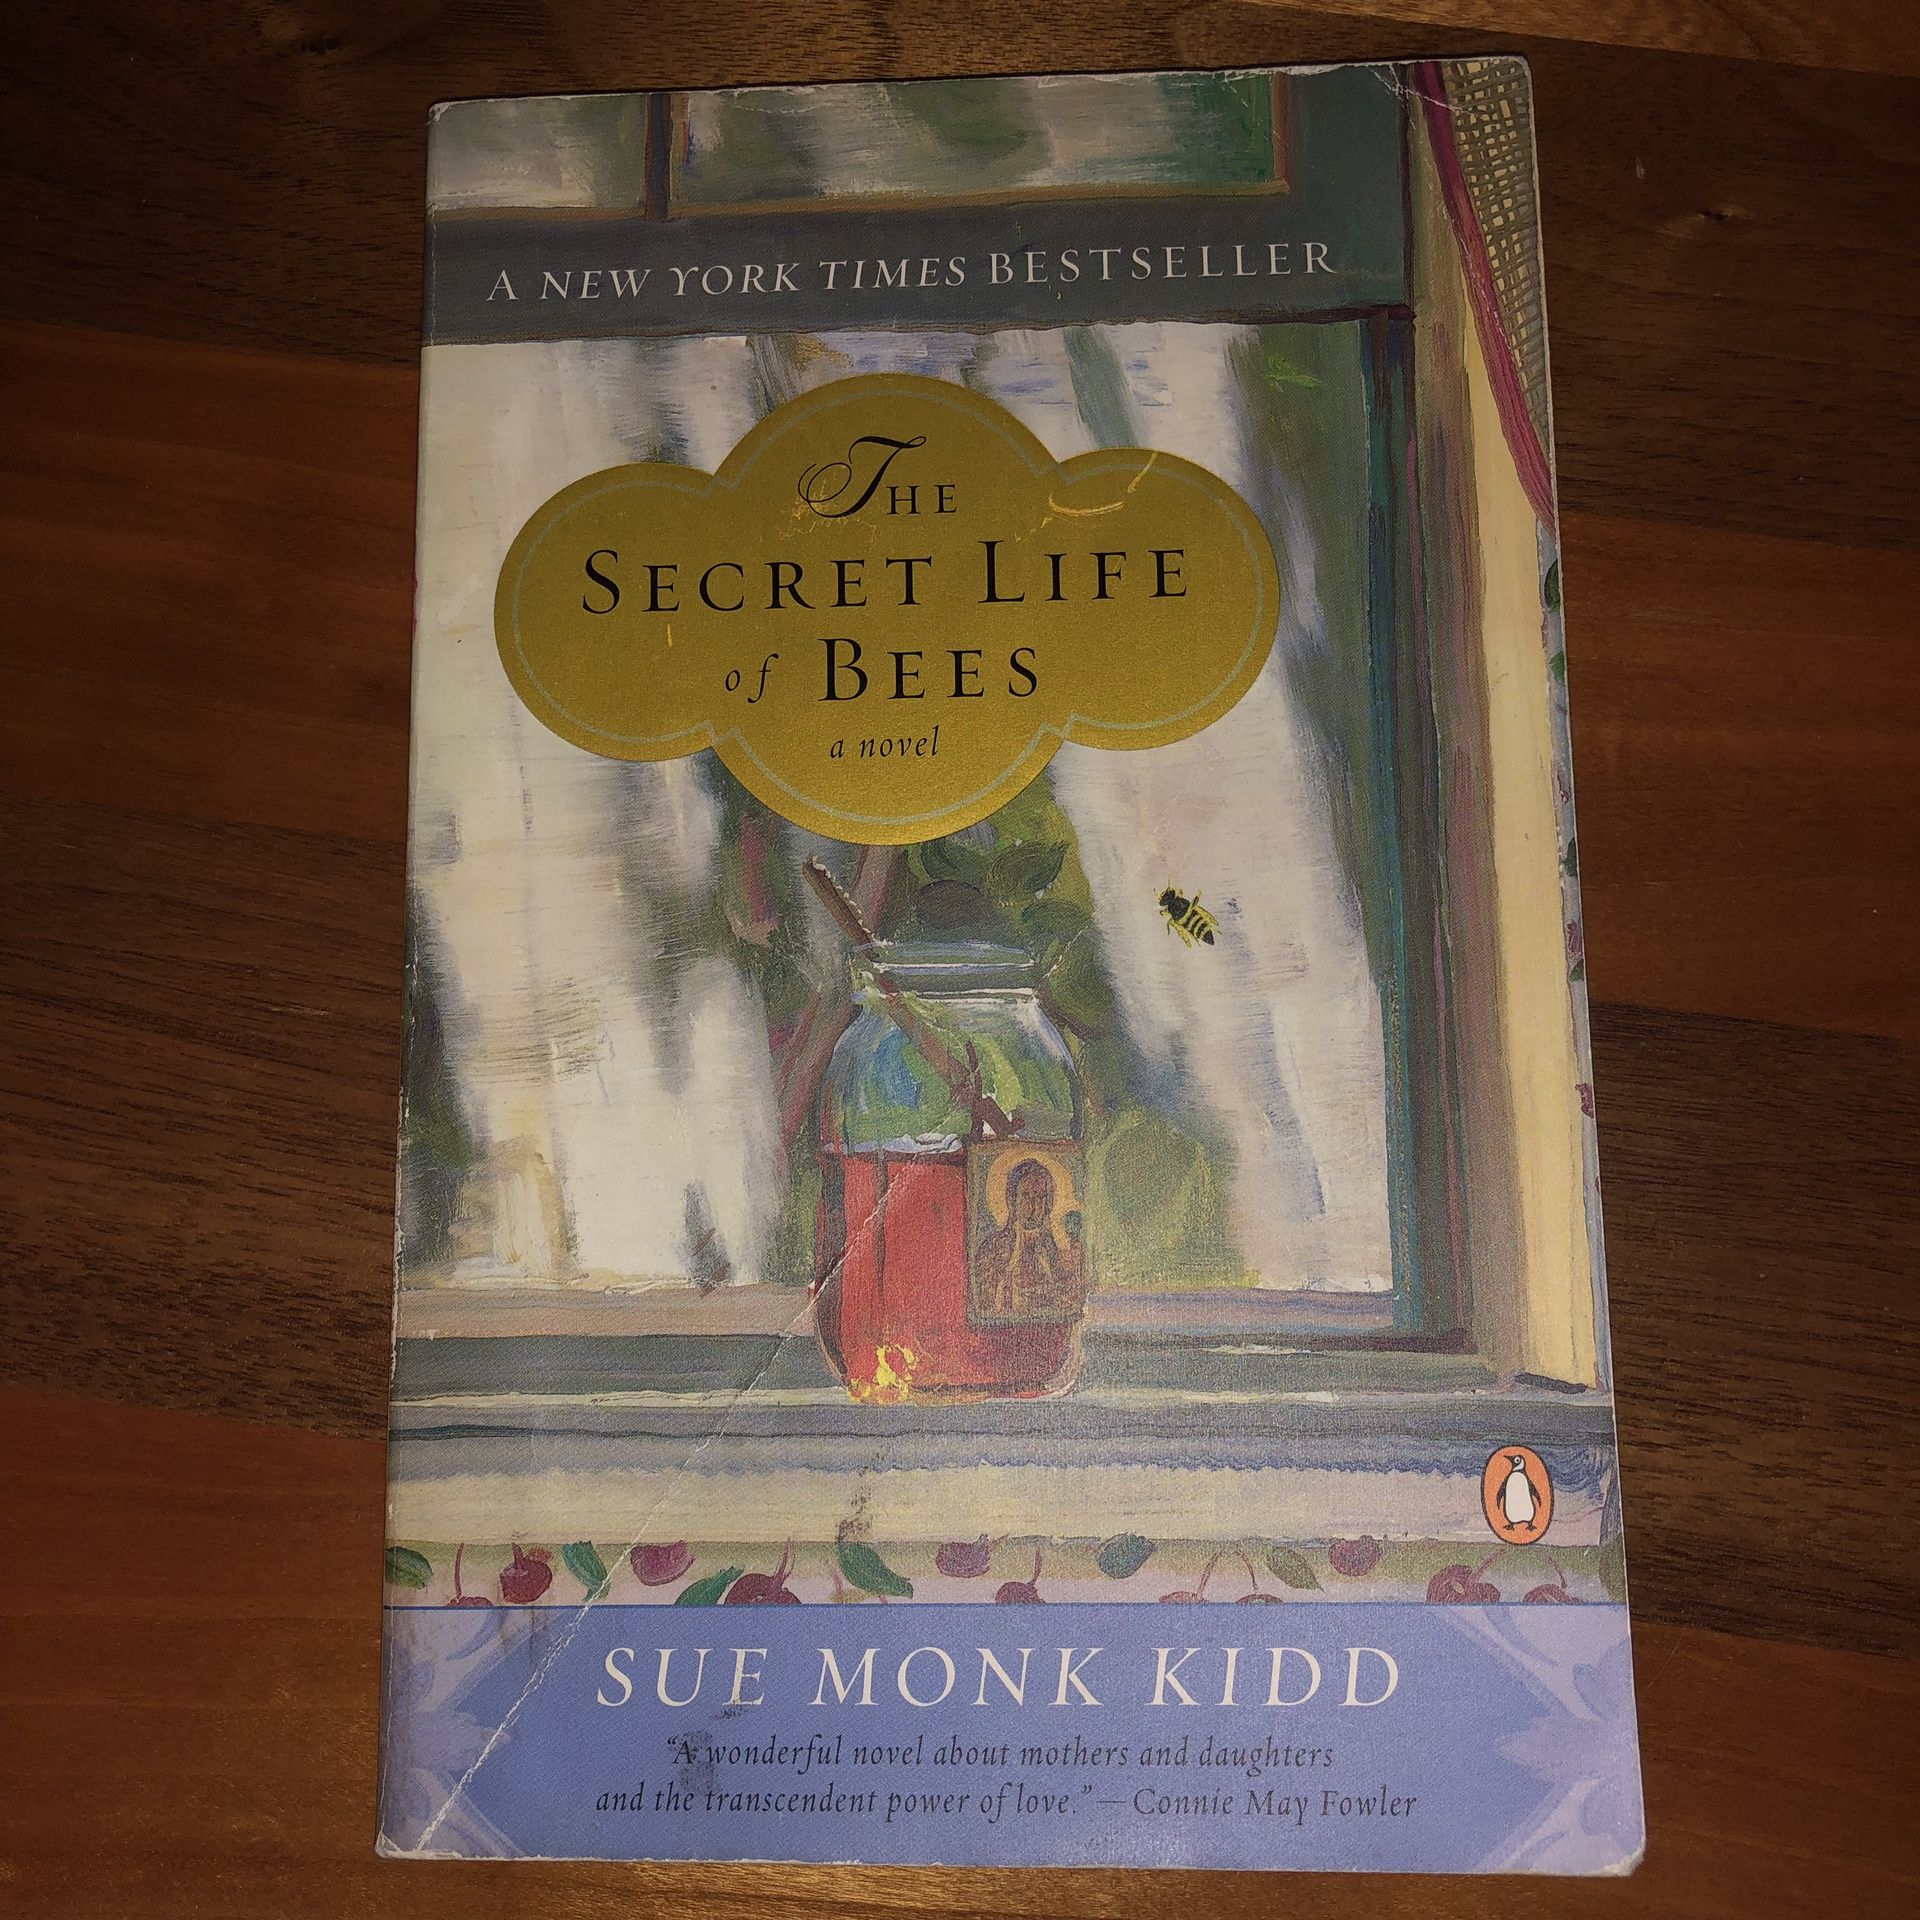 The Secret Life of Bees by Sue Monk Kidd (Tribeca Manhattan)